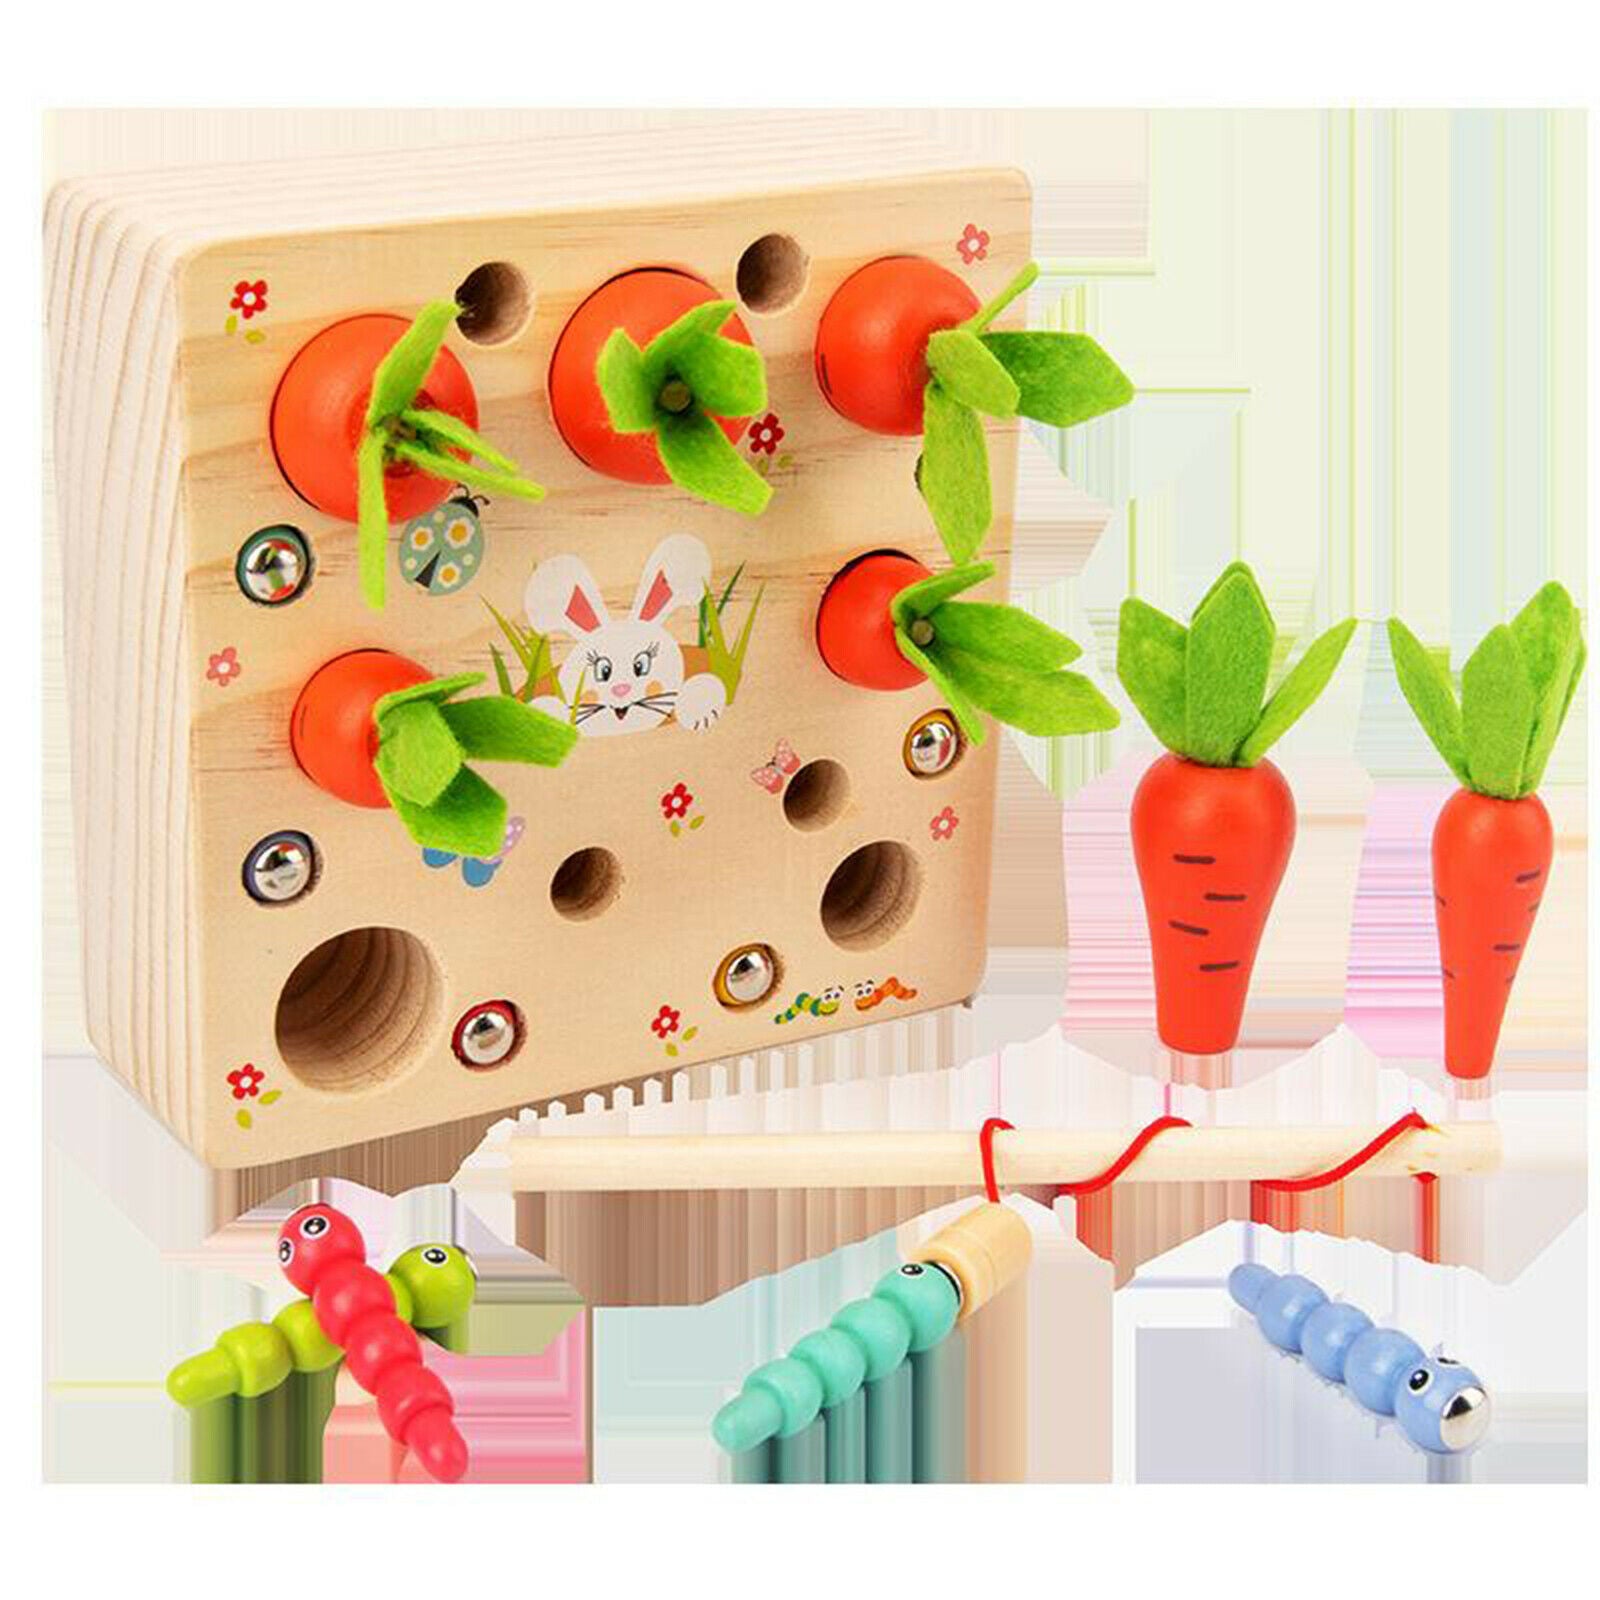 Wooden Montessori Toys, Carrots Harvest Shape Size Sorting Worm Catching